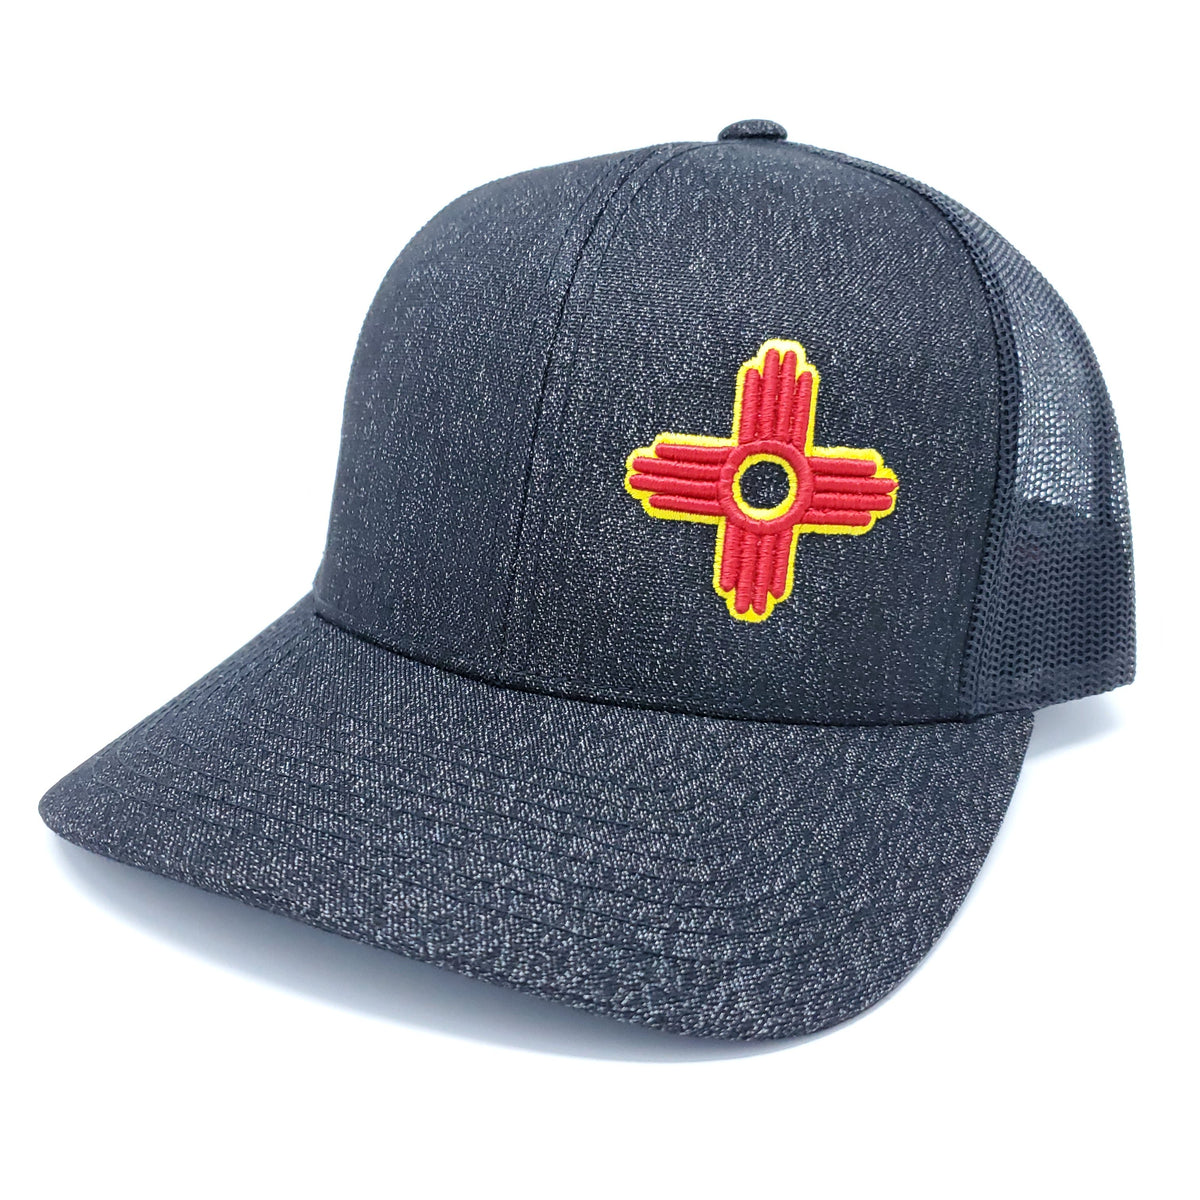 Black Heather Trucker Style Snapback with Embroidered Zia Symbol - Ragged Apparel Screen Printing and Signs - www.nmshirts.com